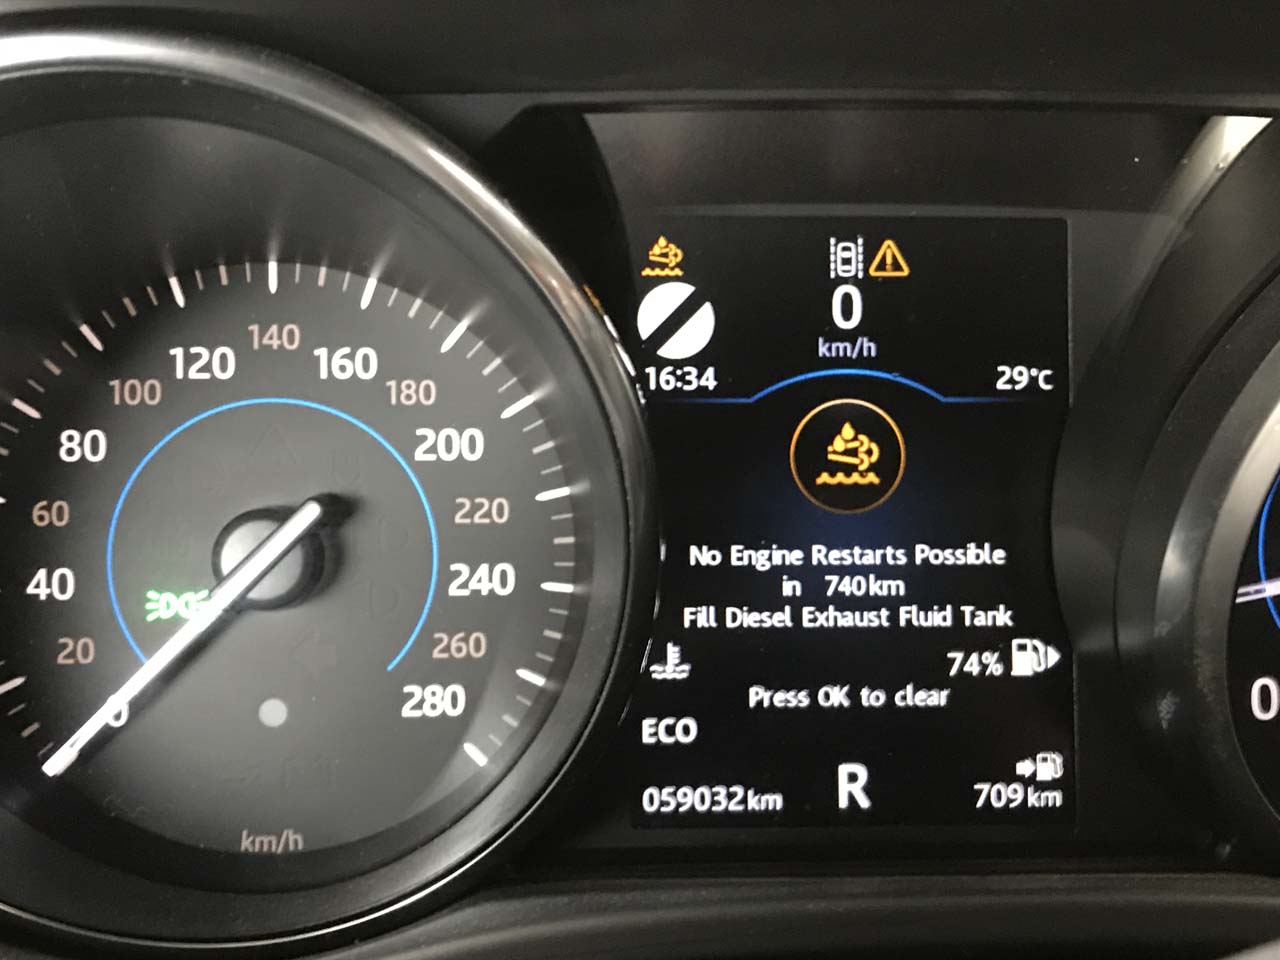 The warning message degenerating into a more threatening message that the car wouldn't start after 740km